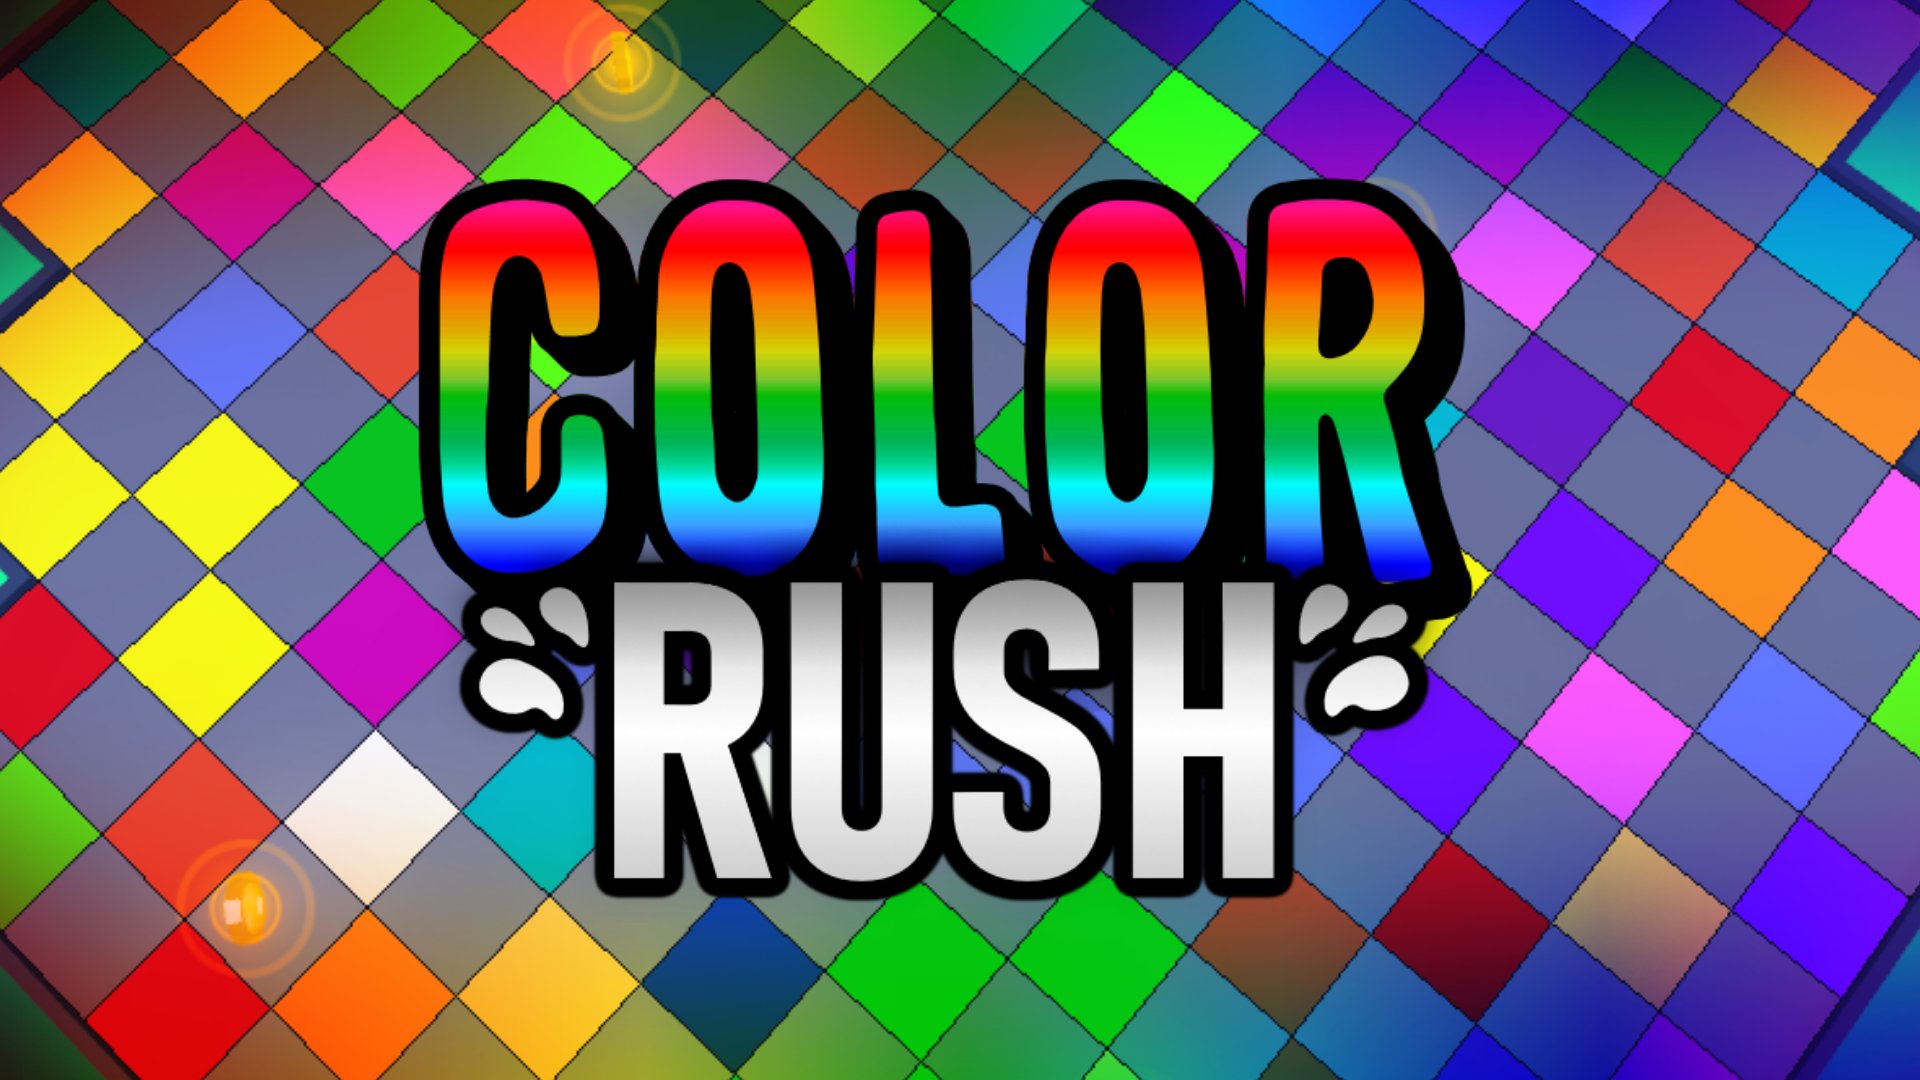 Rycitrus Games On Twitter Welcome To Color Rush Coming Friday April 24th Rush To The Right Color Before The Floor Disappears Will You Be The Last Standing And Crowned The Champion Of - roblox pictures to color